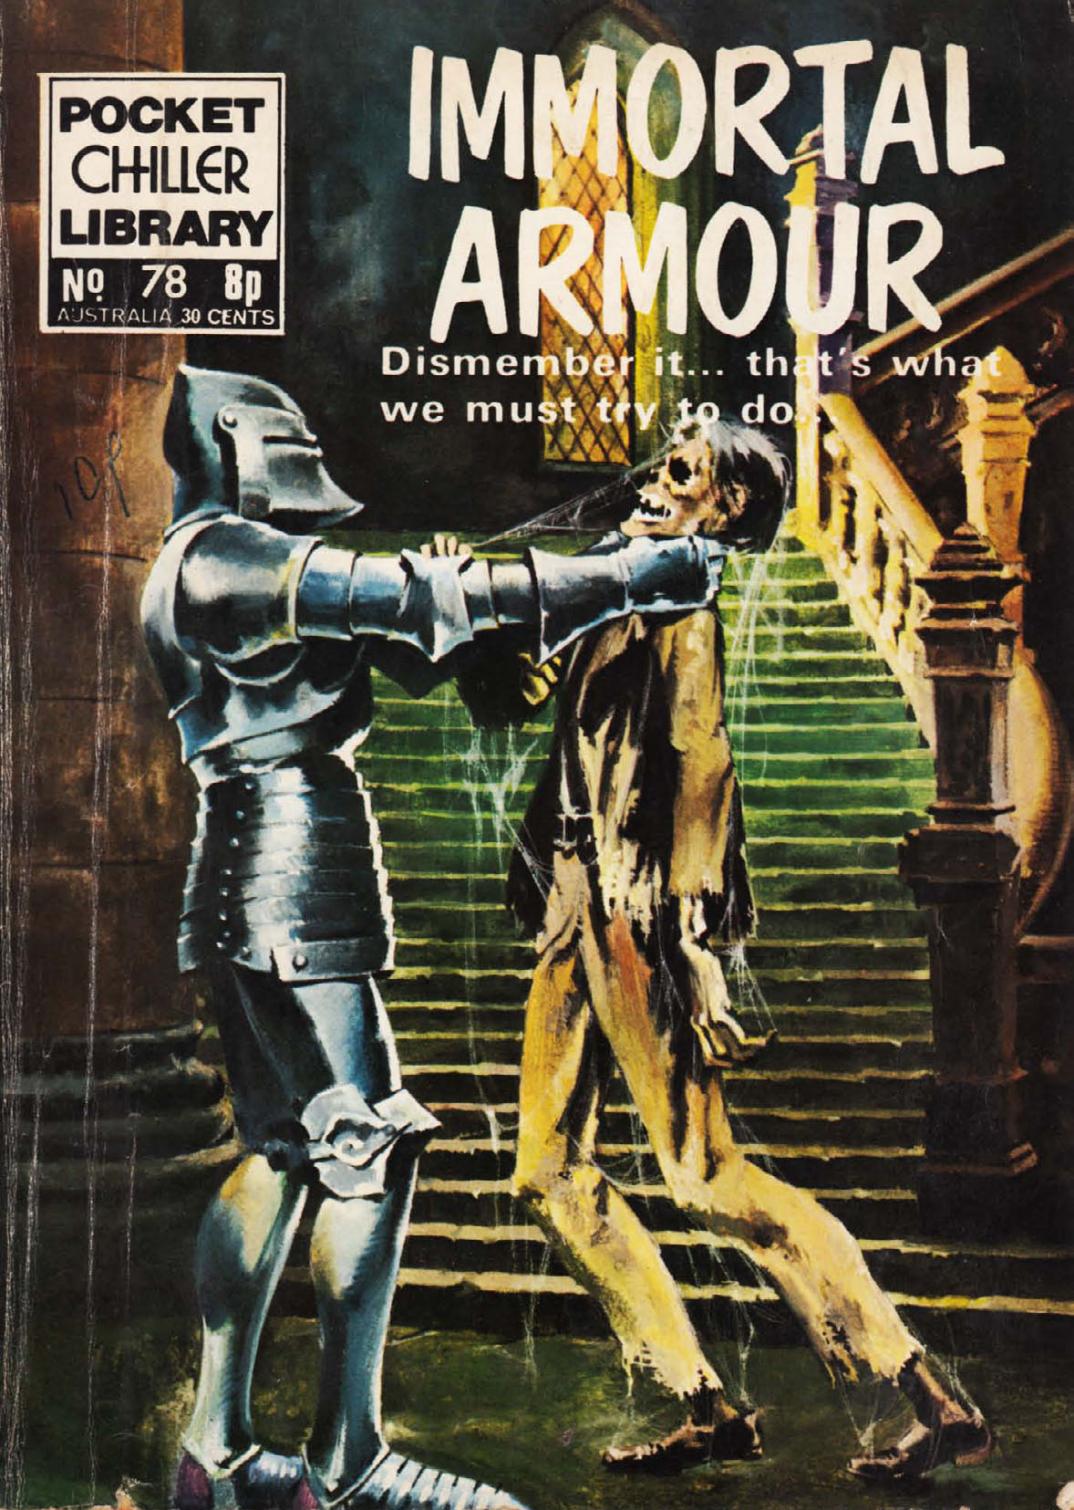 Pocket Chiller library 78 - Immortal armour